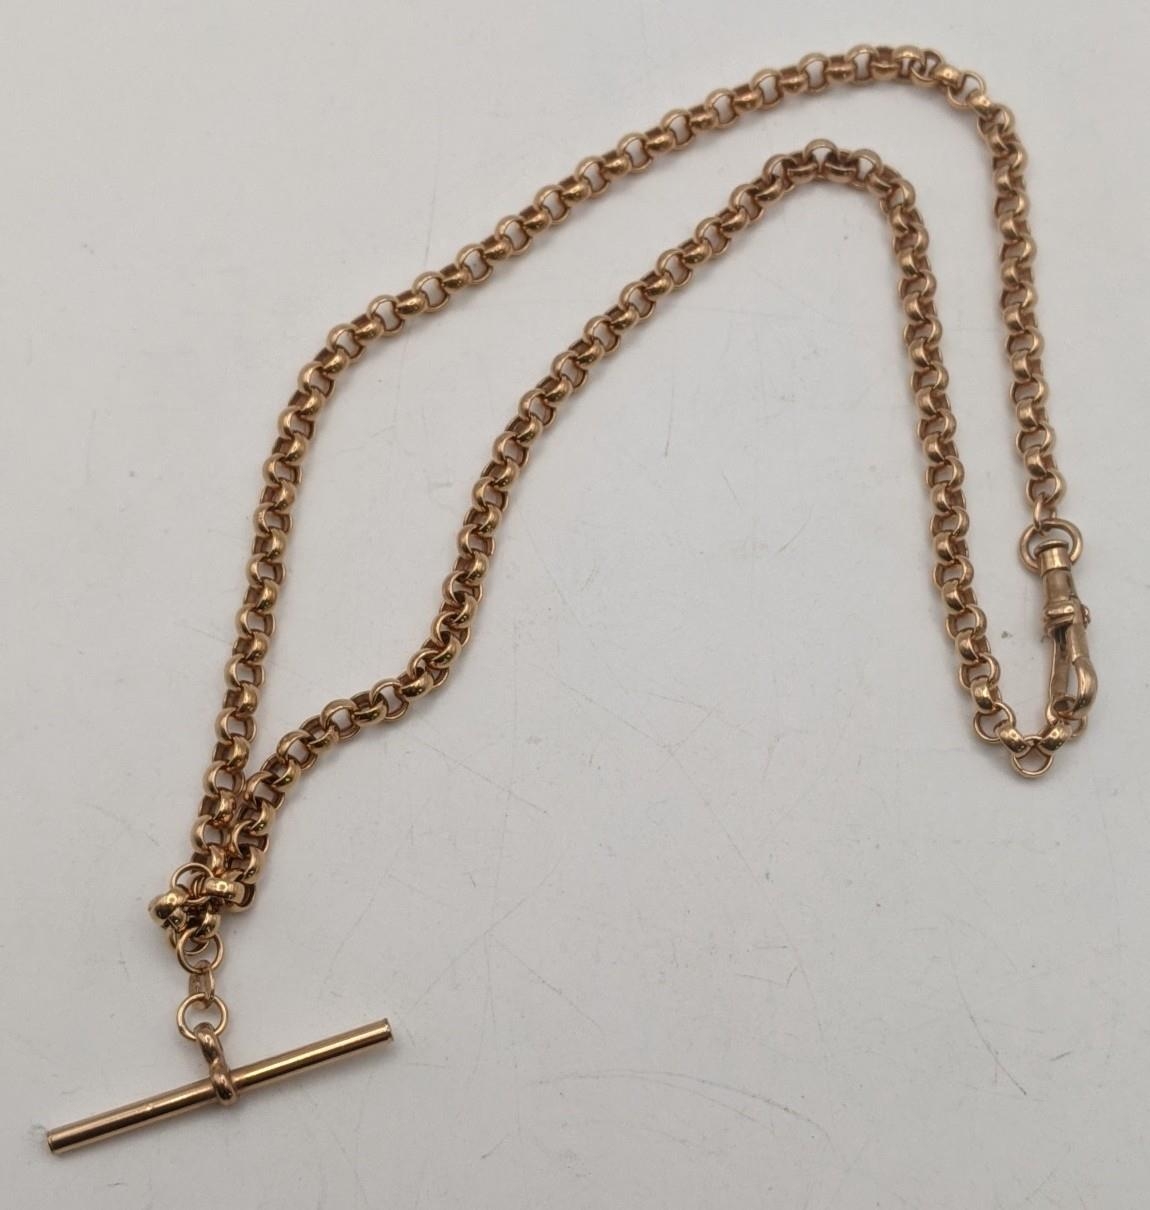 A 9ct rose gold pocket watch chain with a bulldog clip and T-bar, total weight 10.6g Location: